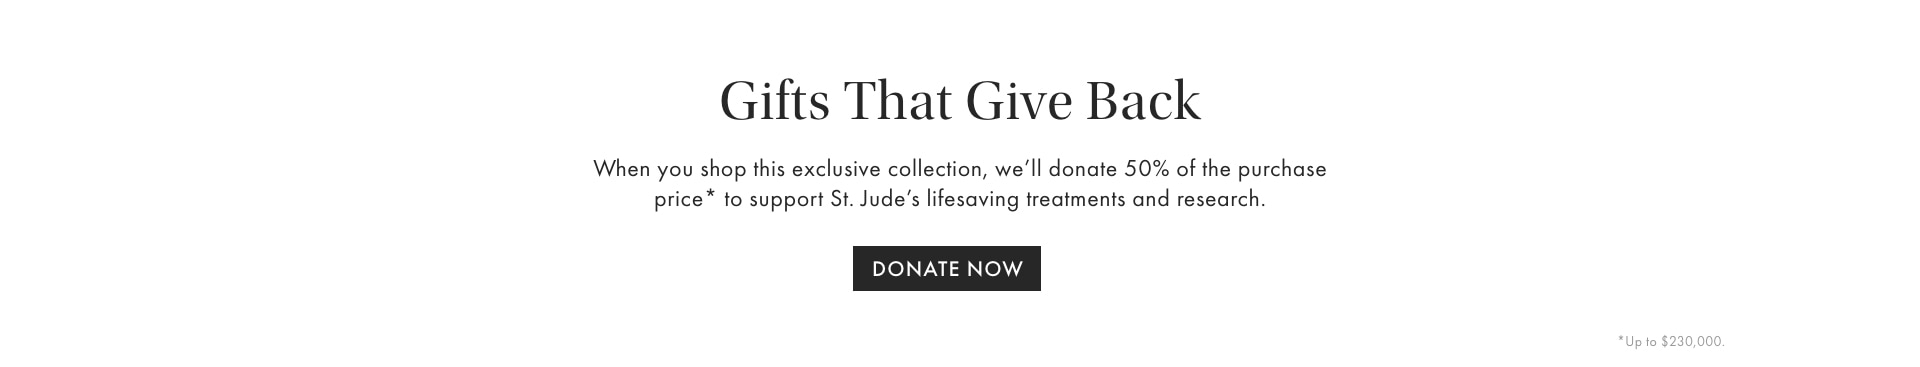 Gifts that Give Back: Donate Now